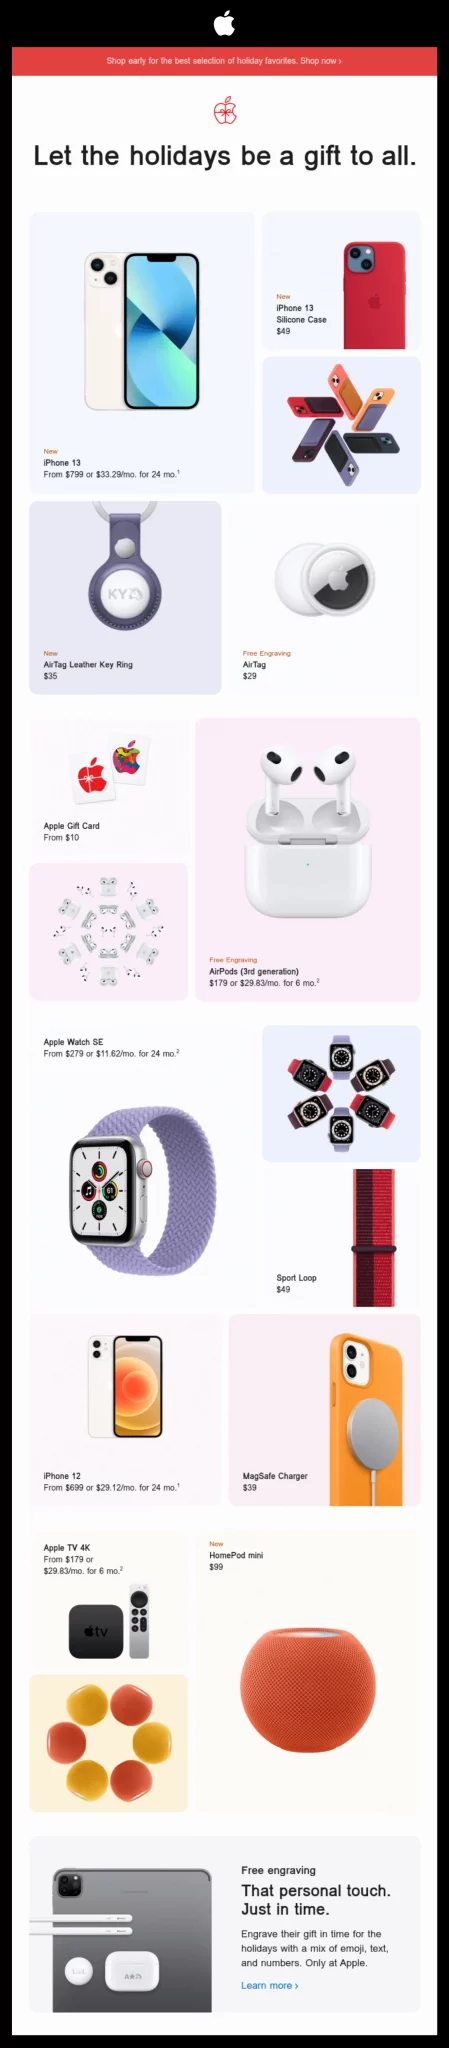 Apple newsletter email iPhones silicon cases leather key rings air tags gift cards air pods and Apple watches to safe chargers Christmas gifts assorted collection